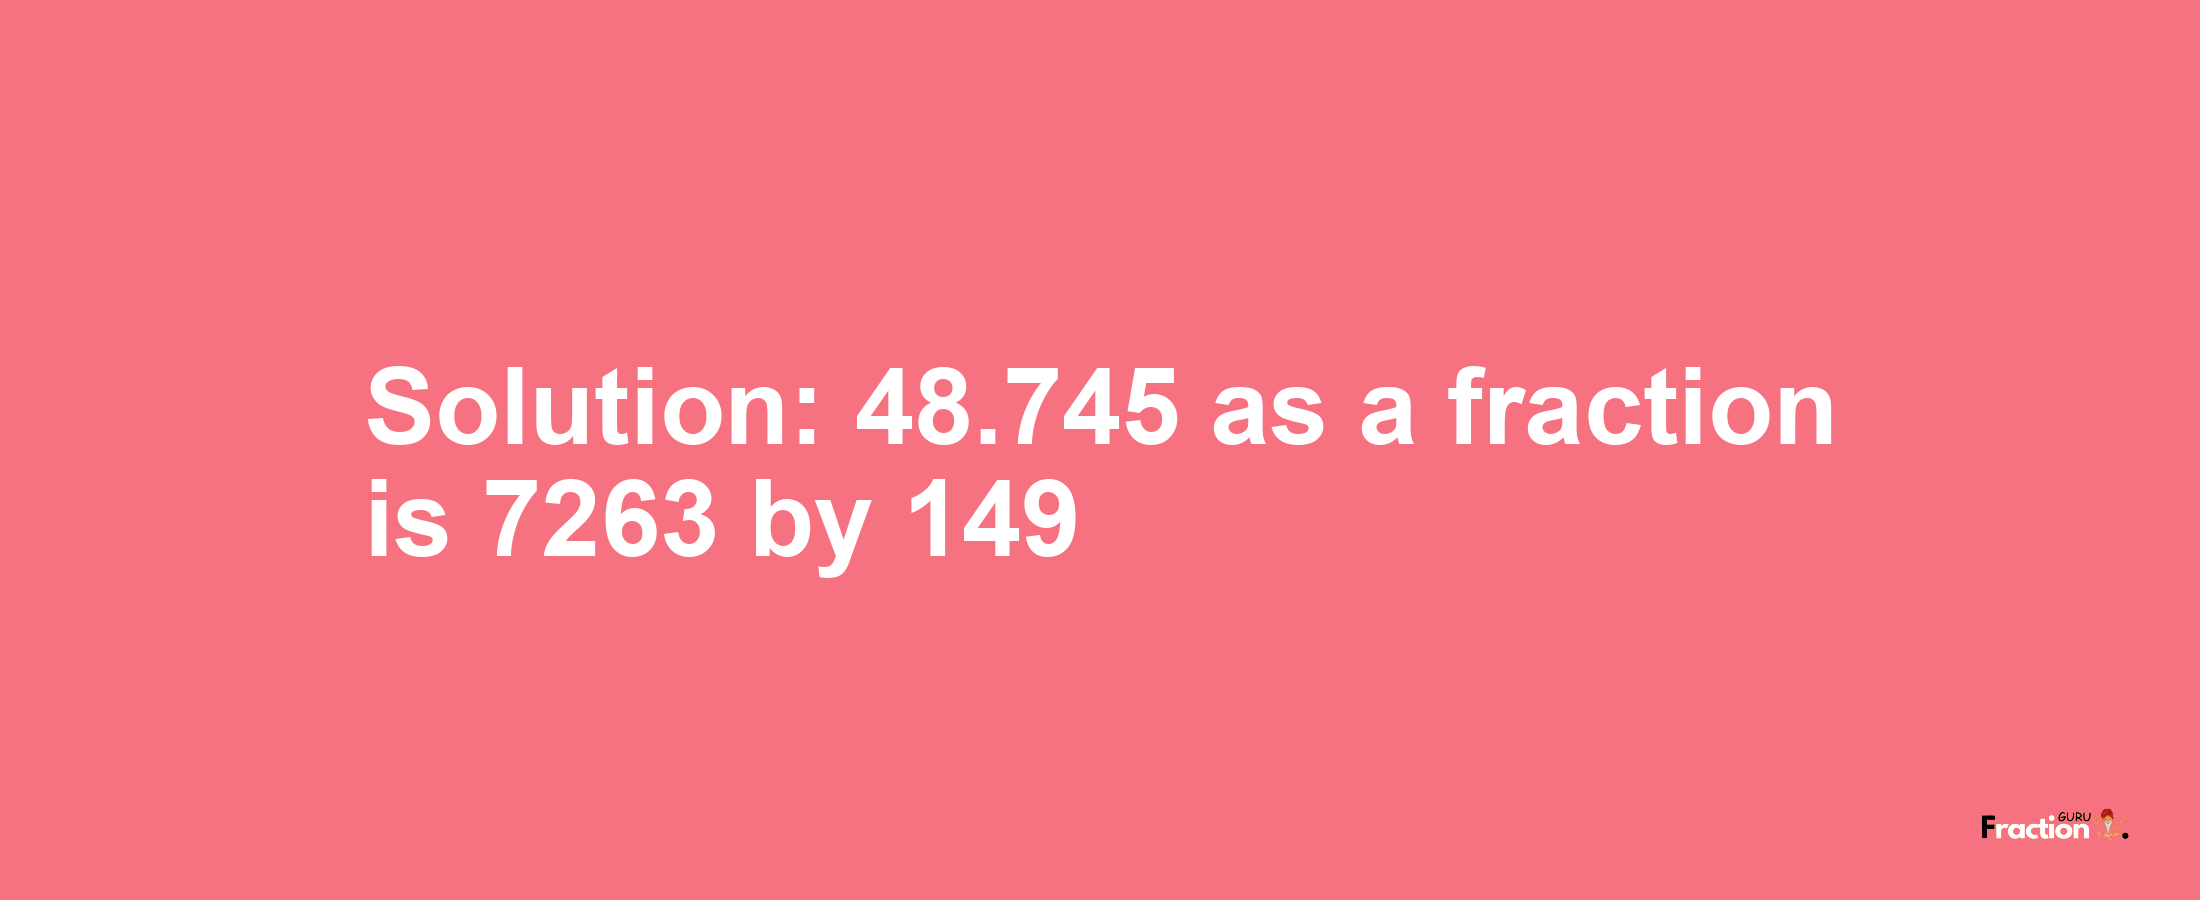 Solution:48.745 as a fraction is 7263/149